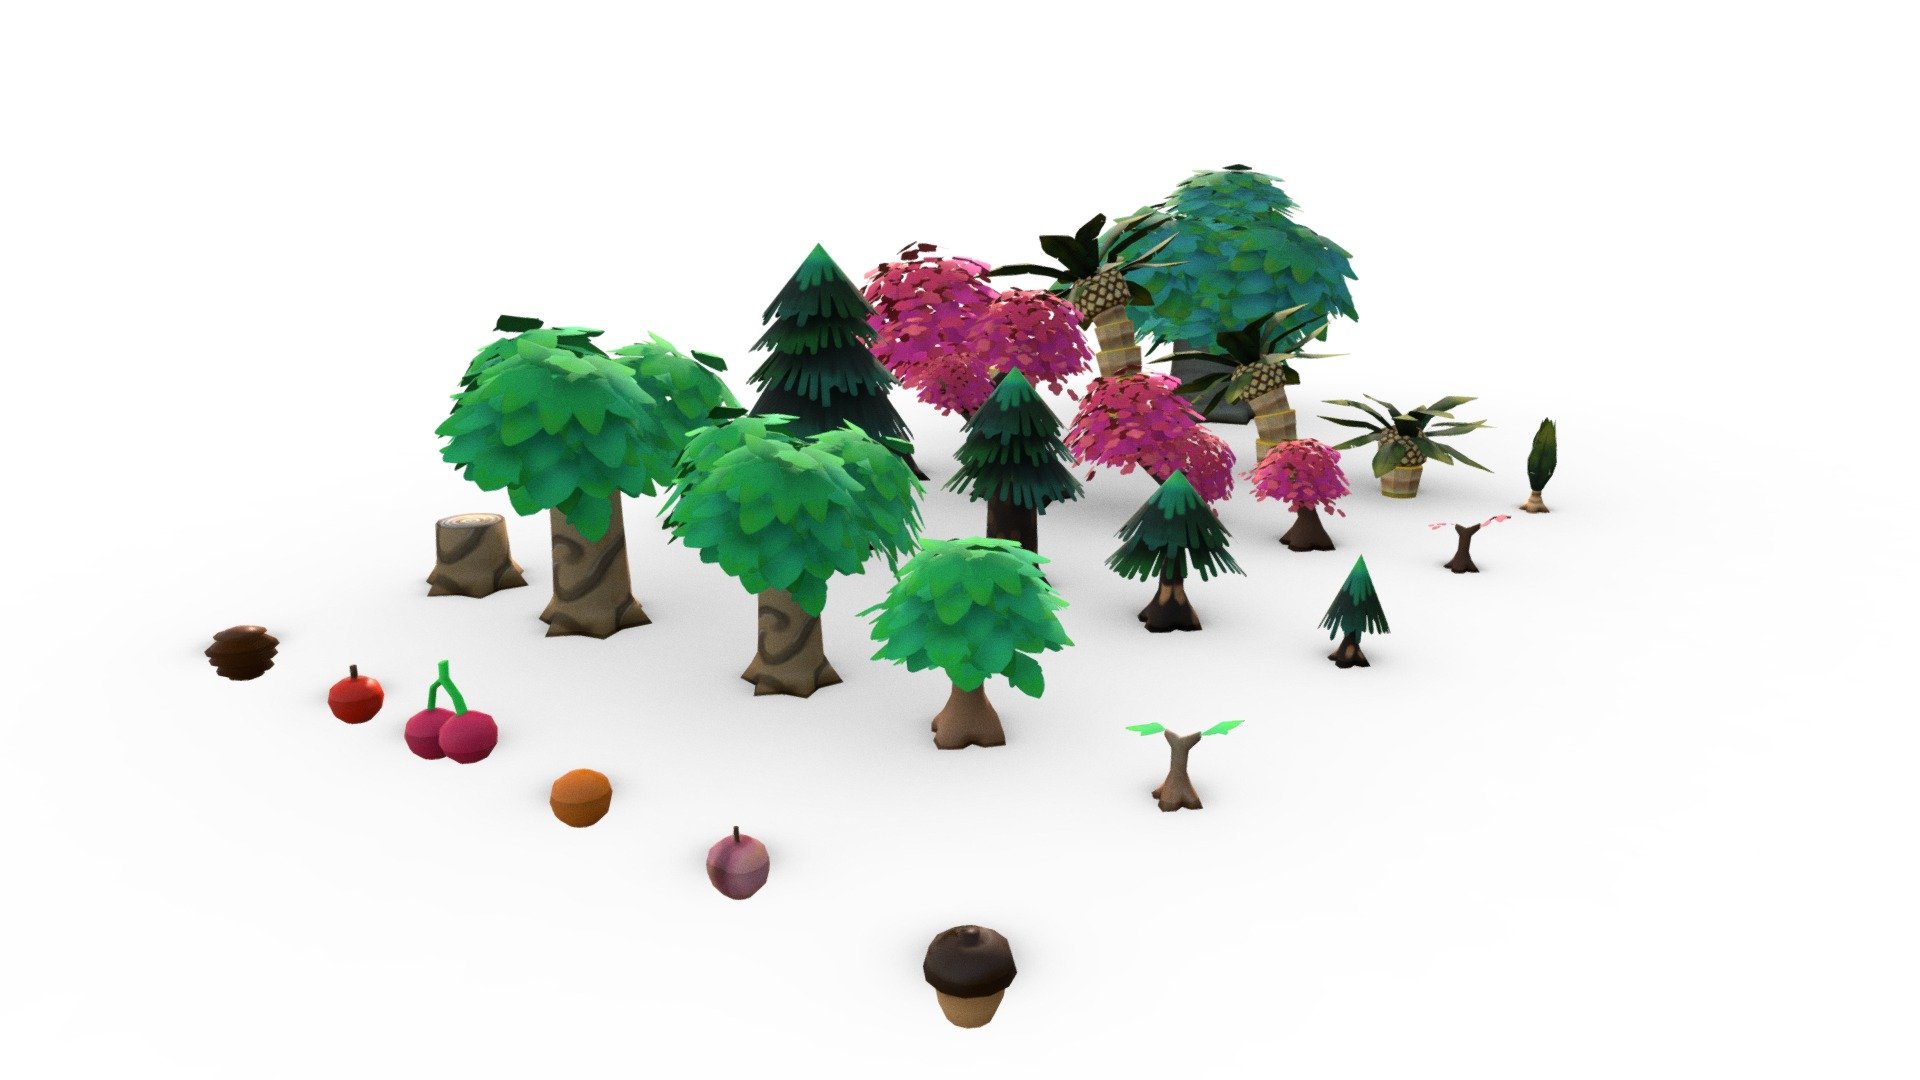 This is an asset pack based on the animal crossing style of nature 
You can download it for free here. And it will be available on the game engines asset stores too.
If you like it or feel like this have helped you in any way consider subscribing to my patreon in https://www.patreon.com/gostbento 
if you are interested in commissions you can contact me on fiverr on https://www.fiverr.com/users/gostbento/ ir on discord over Gost_Bento#5529
(CC atribution cannot be changed, feel free to credit me, but it is not really necessary, I don't mind for intelectual proprety and think the world would be better without it) - FREE DOWNLOAD Low poly nature pack - Download Free 3D model by Bento (@gostbento) 3d model